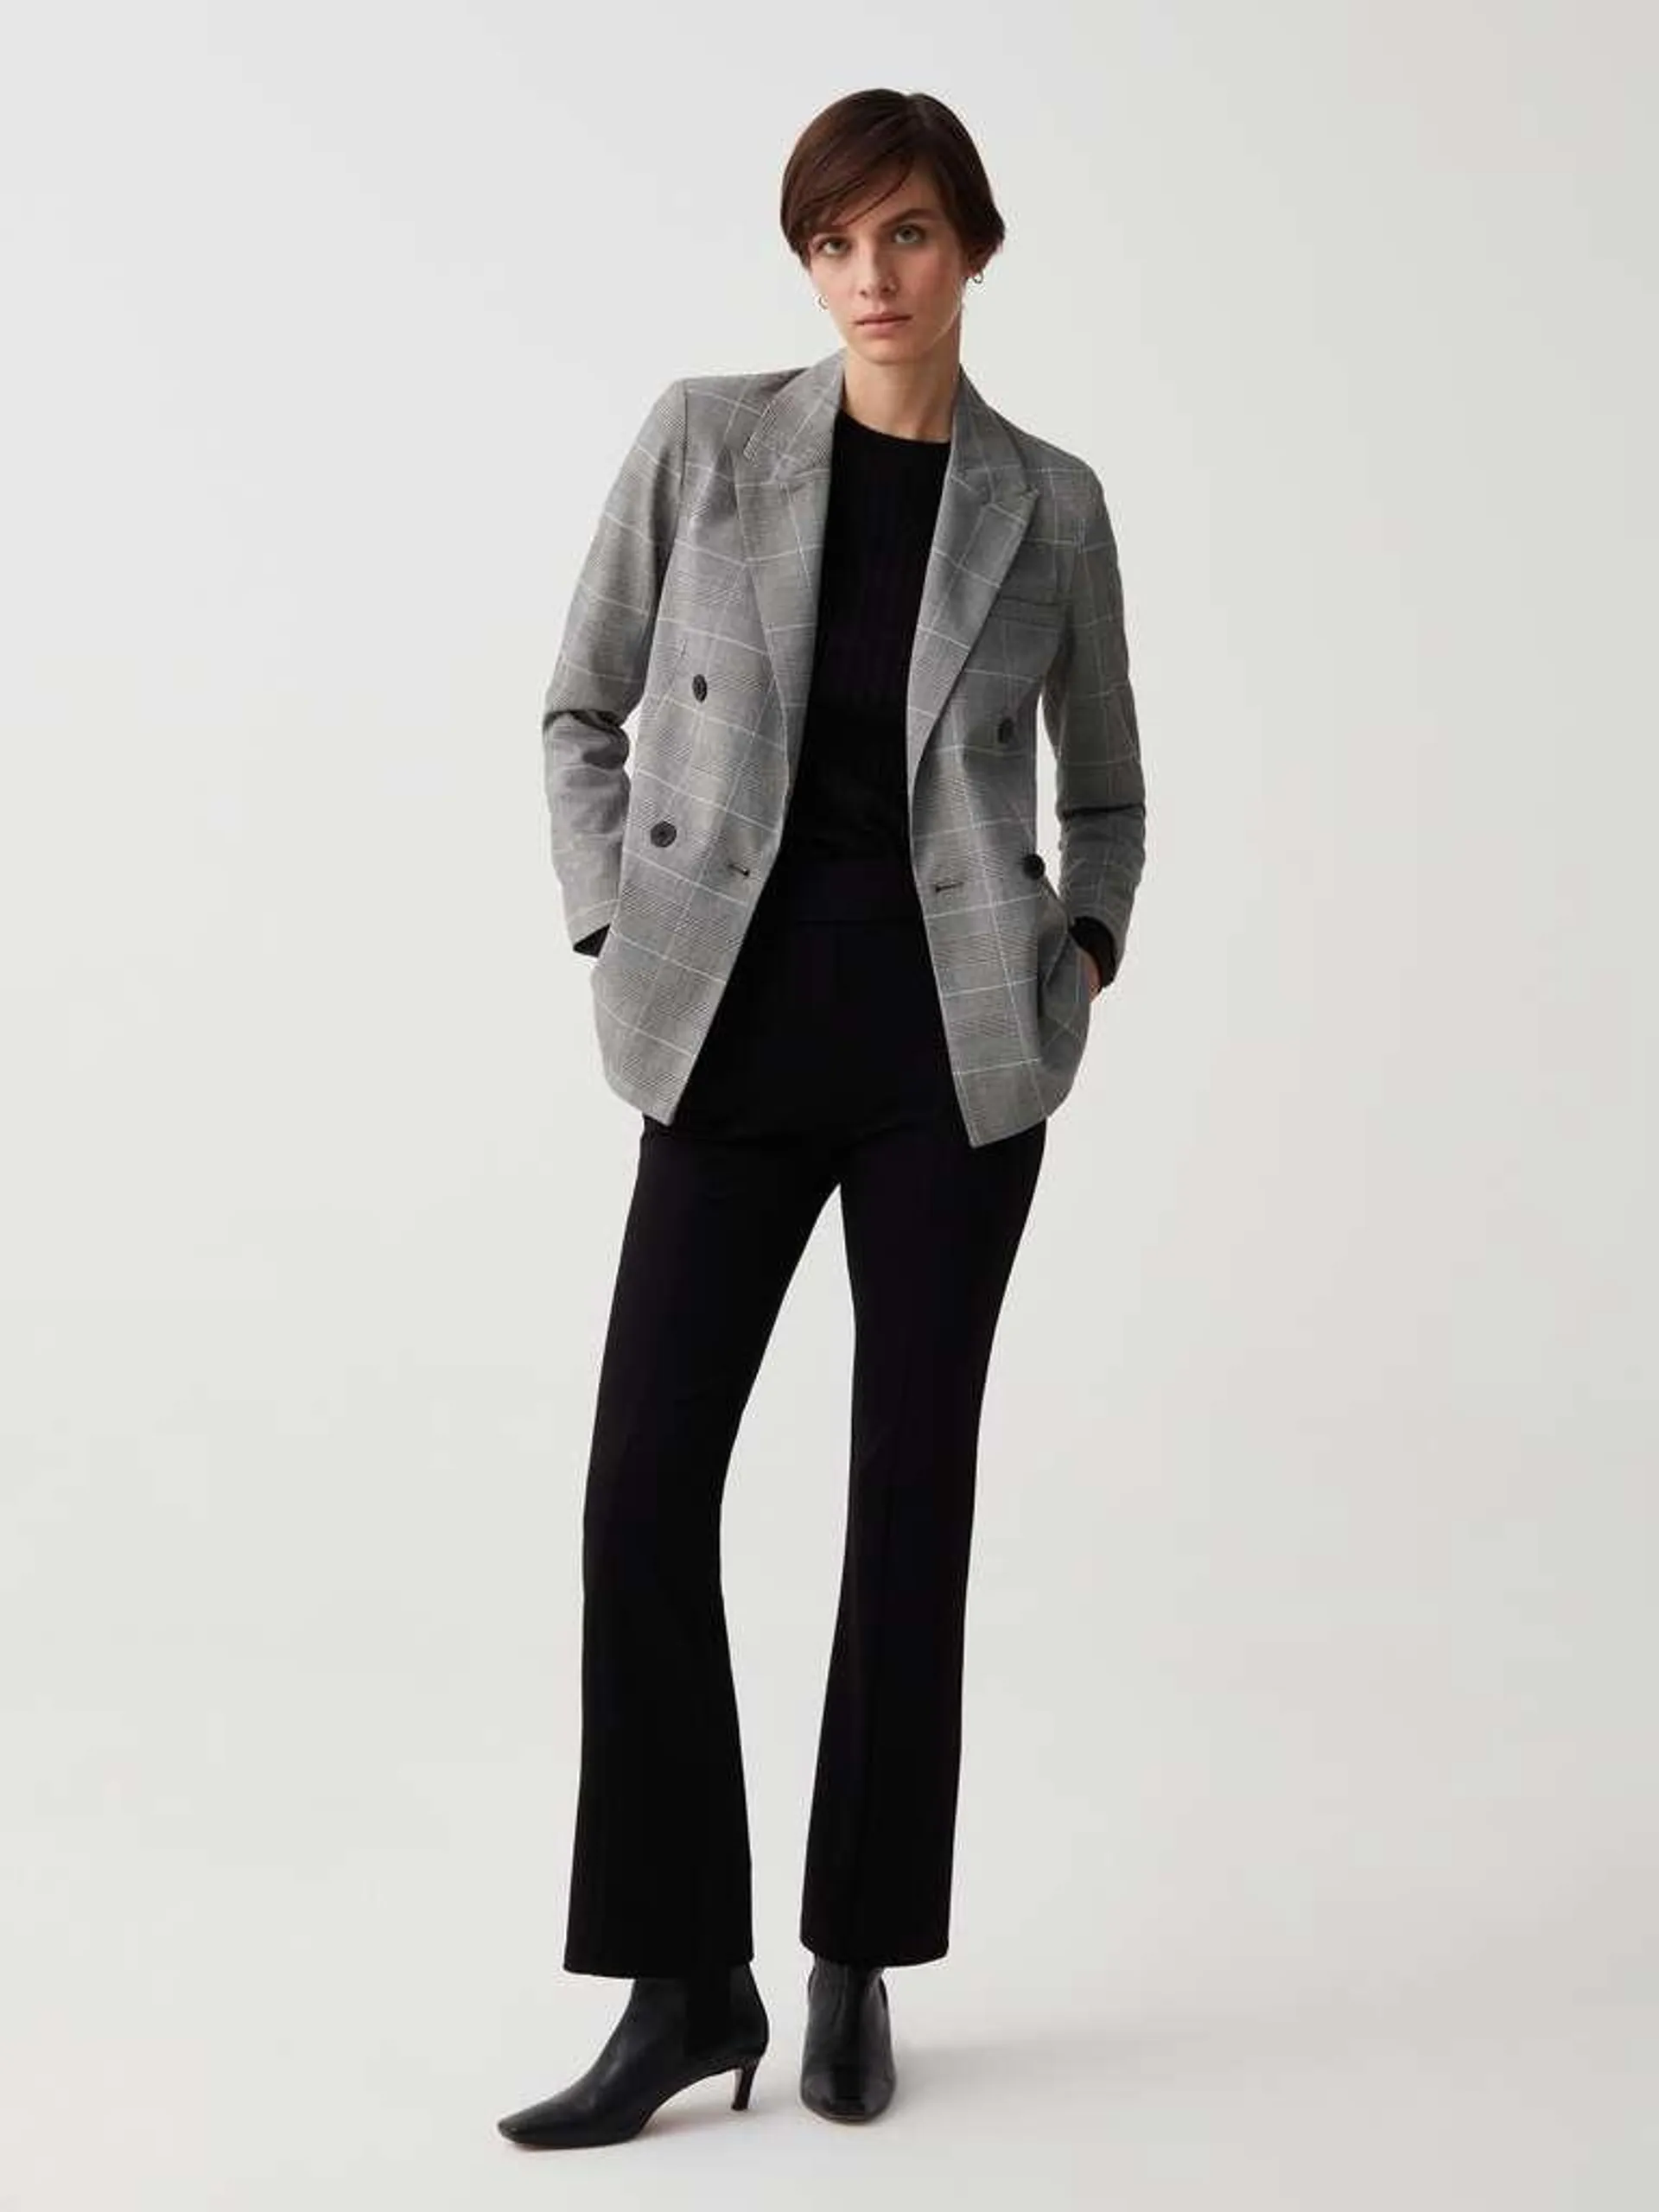 White/Black Double-breasted blazer in Prince of Wales check